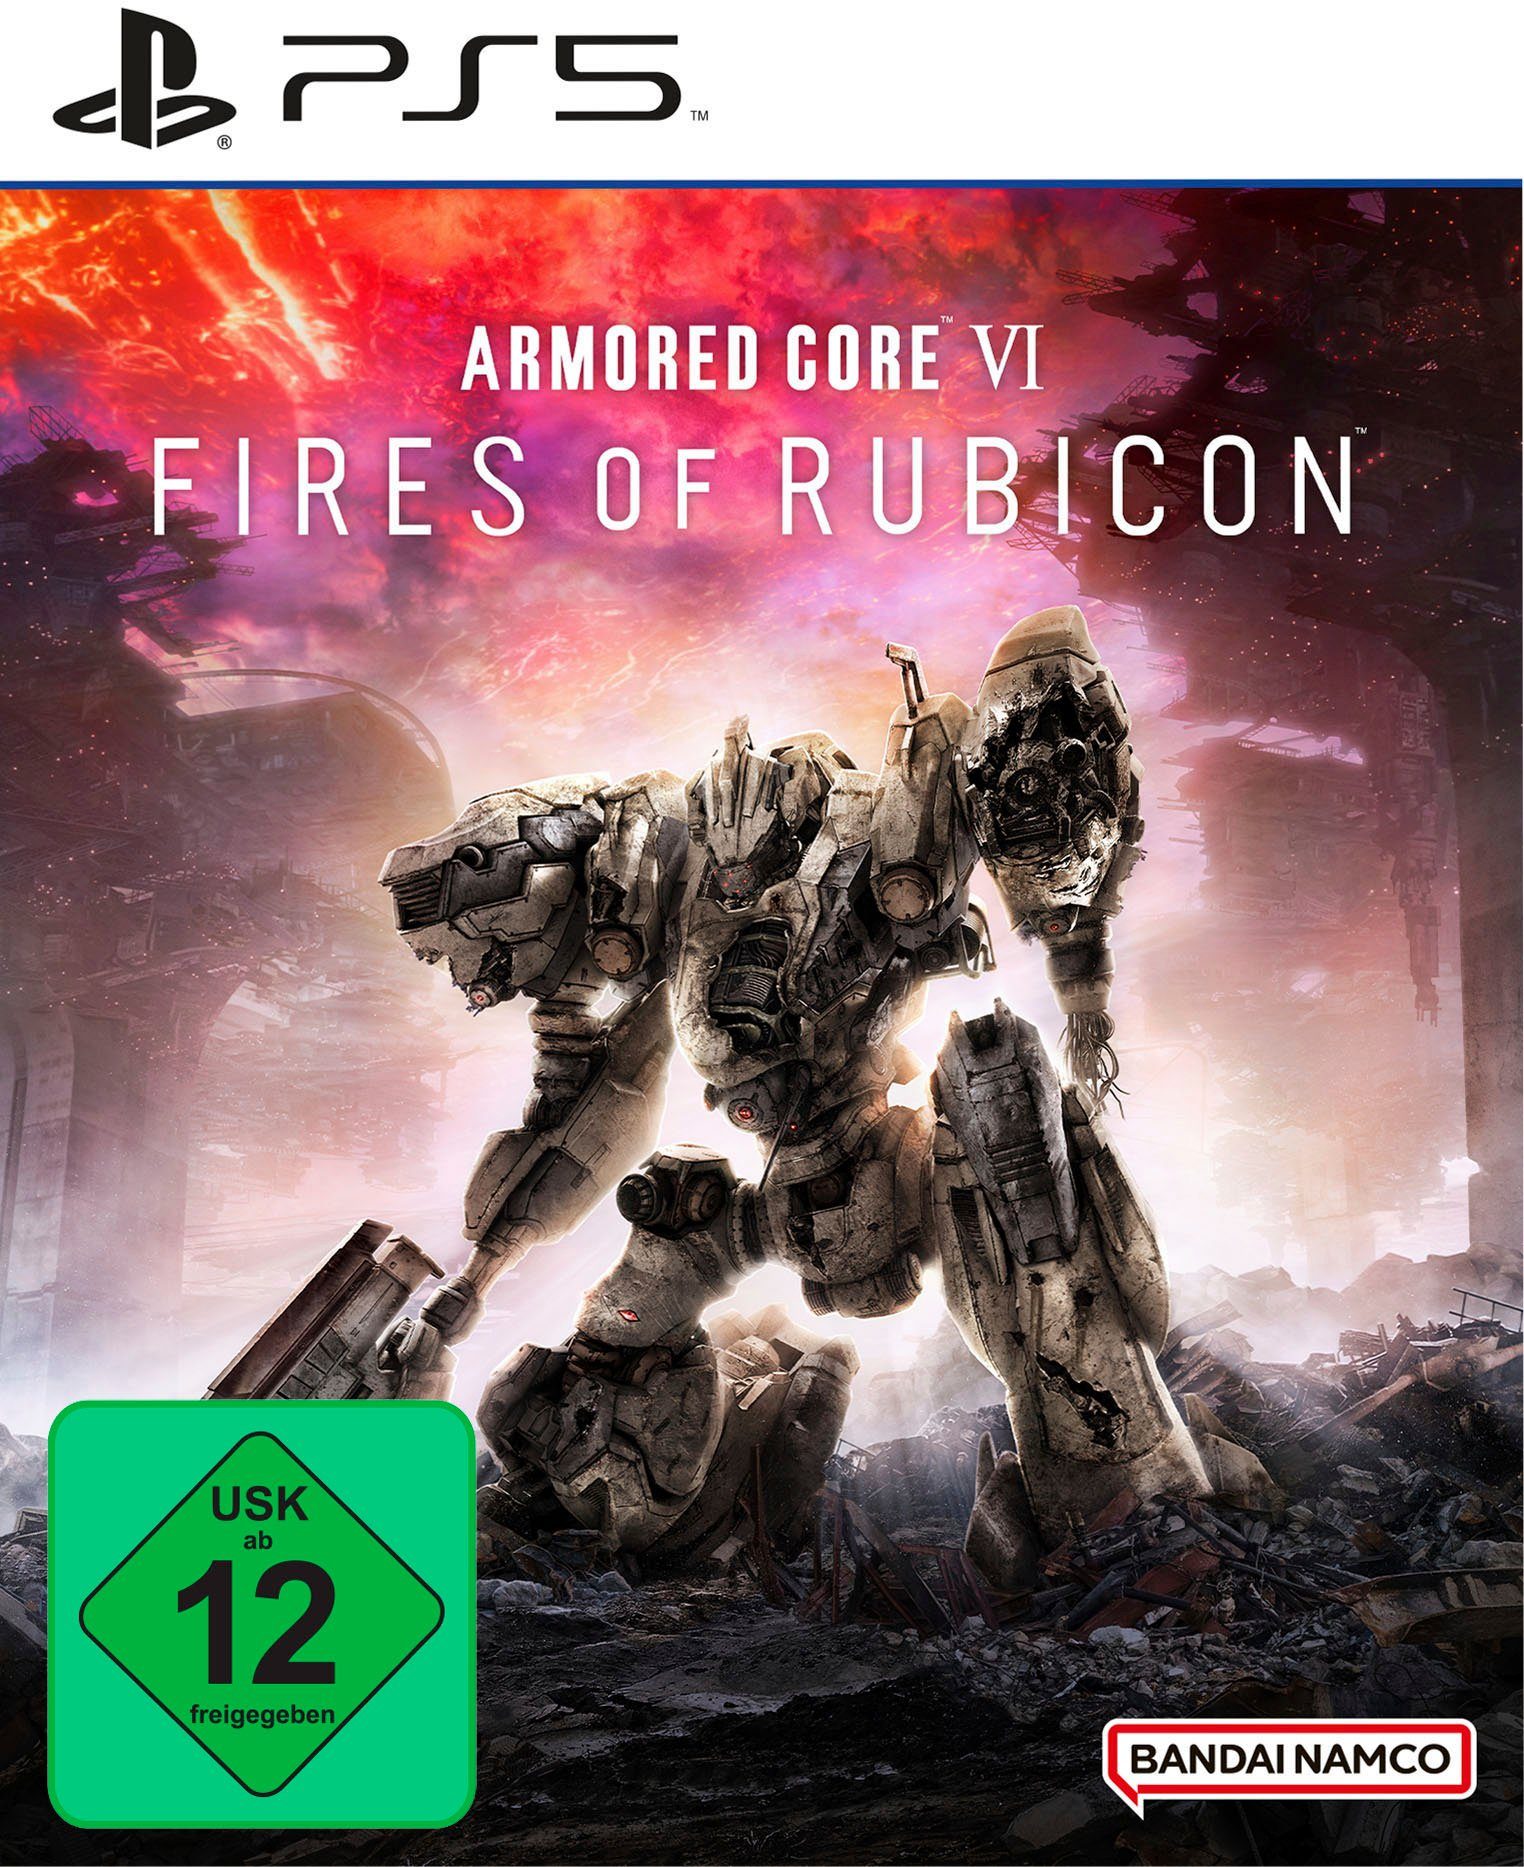 Bandai Armored Core VI Edition Fires PlayStation of Rubicon 5 Launch